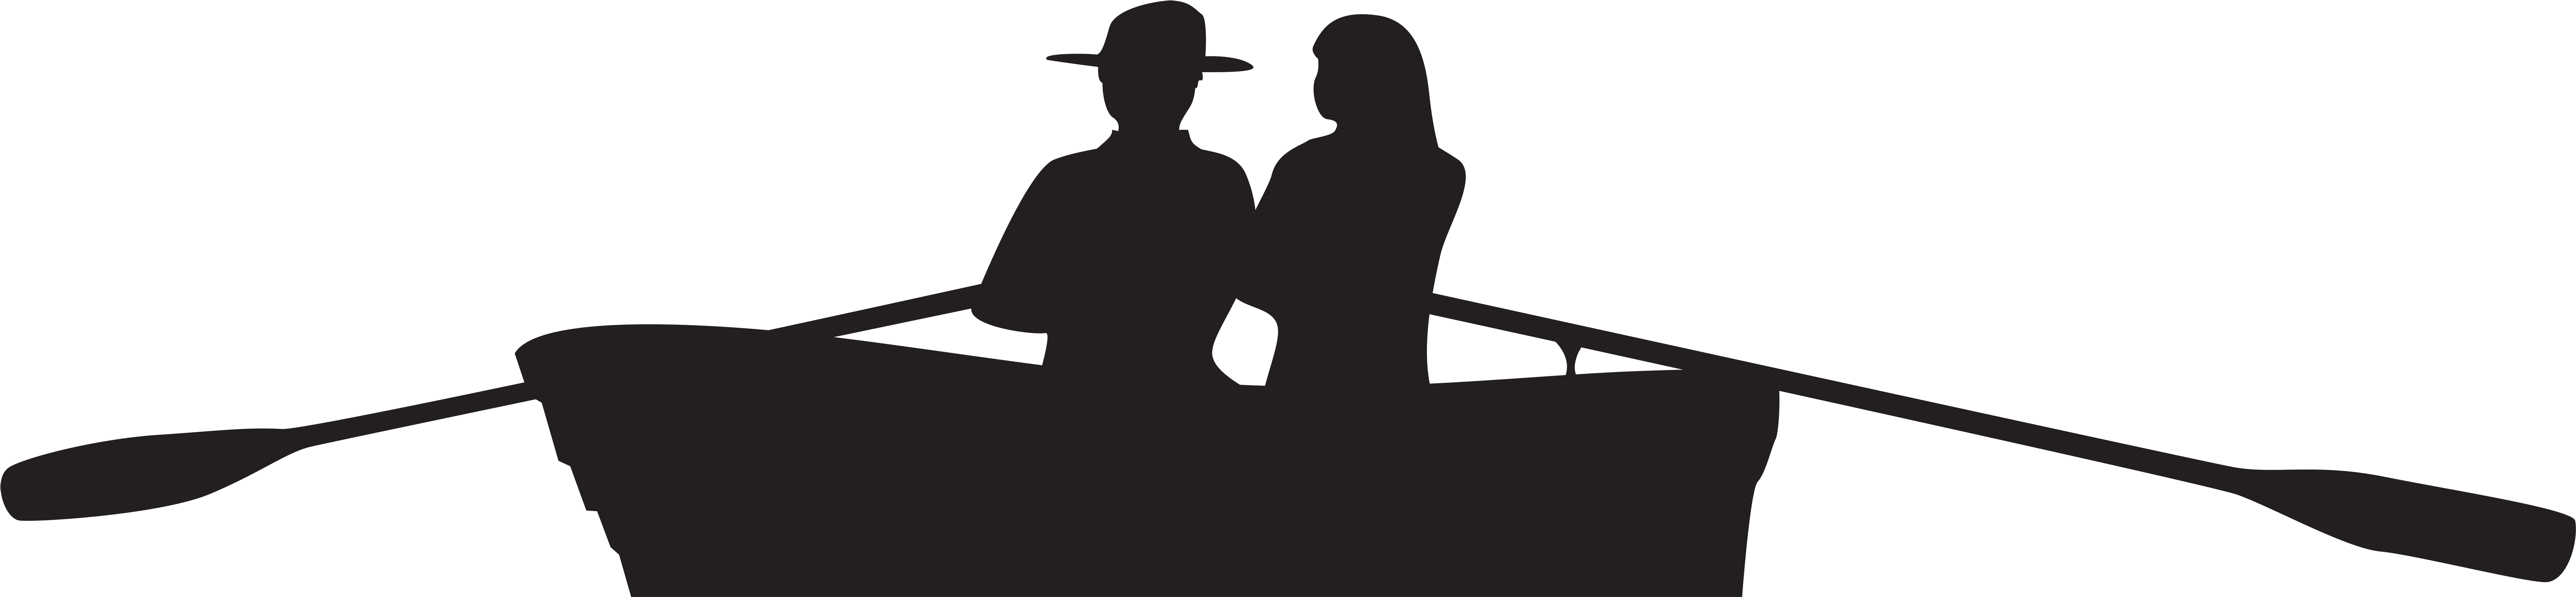 Couple On Boat Silhouette Png Clip Art Image - Couple On Boat Silhouette (8000x1962)